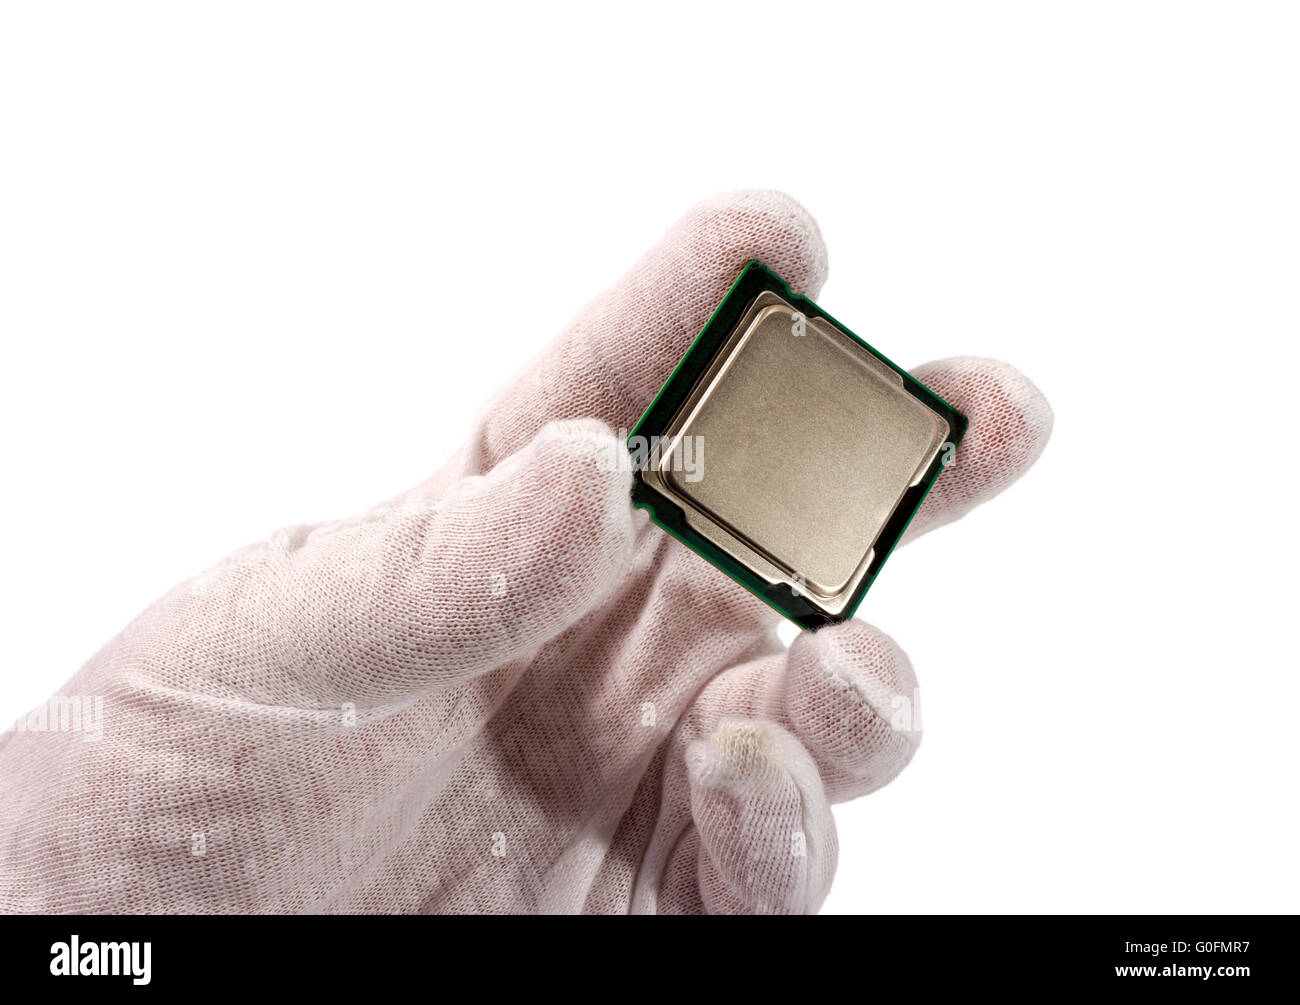 Hand and computer processor from the top side Stock Photo